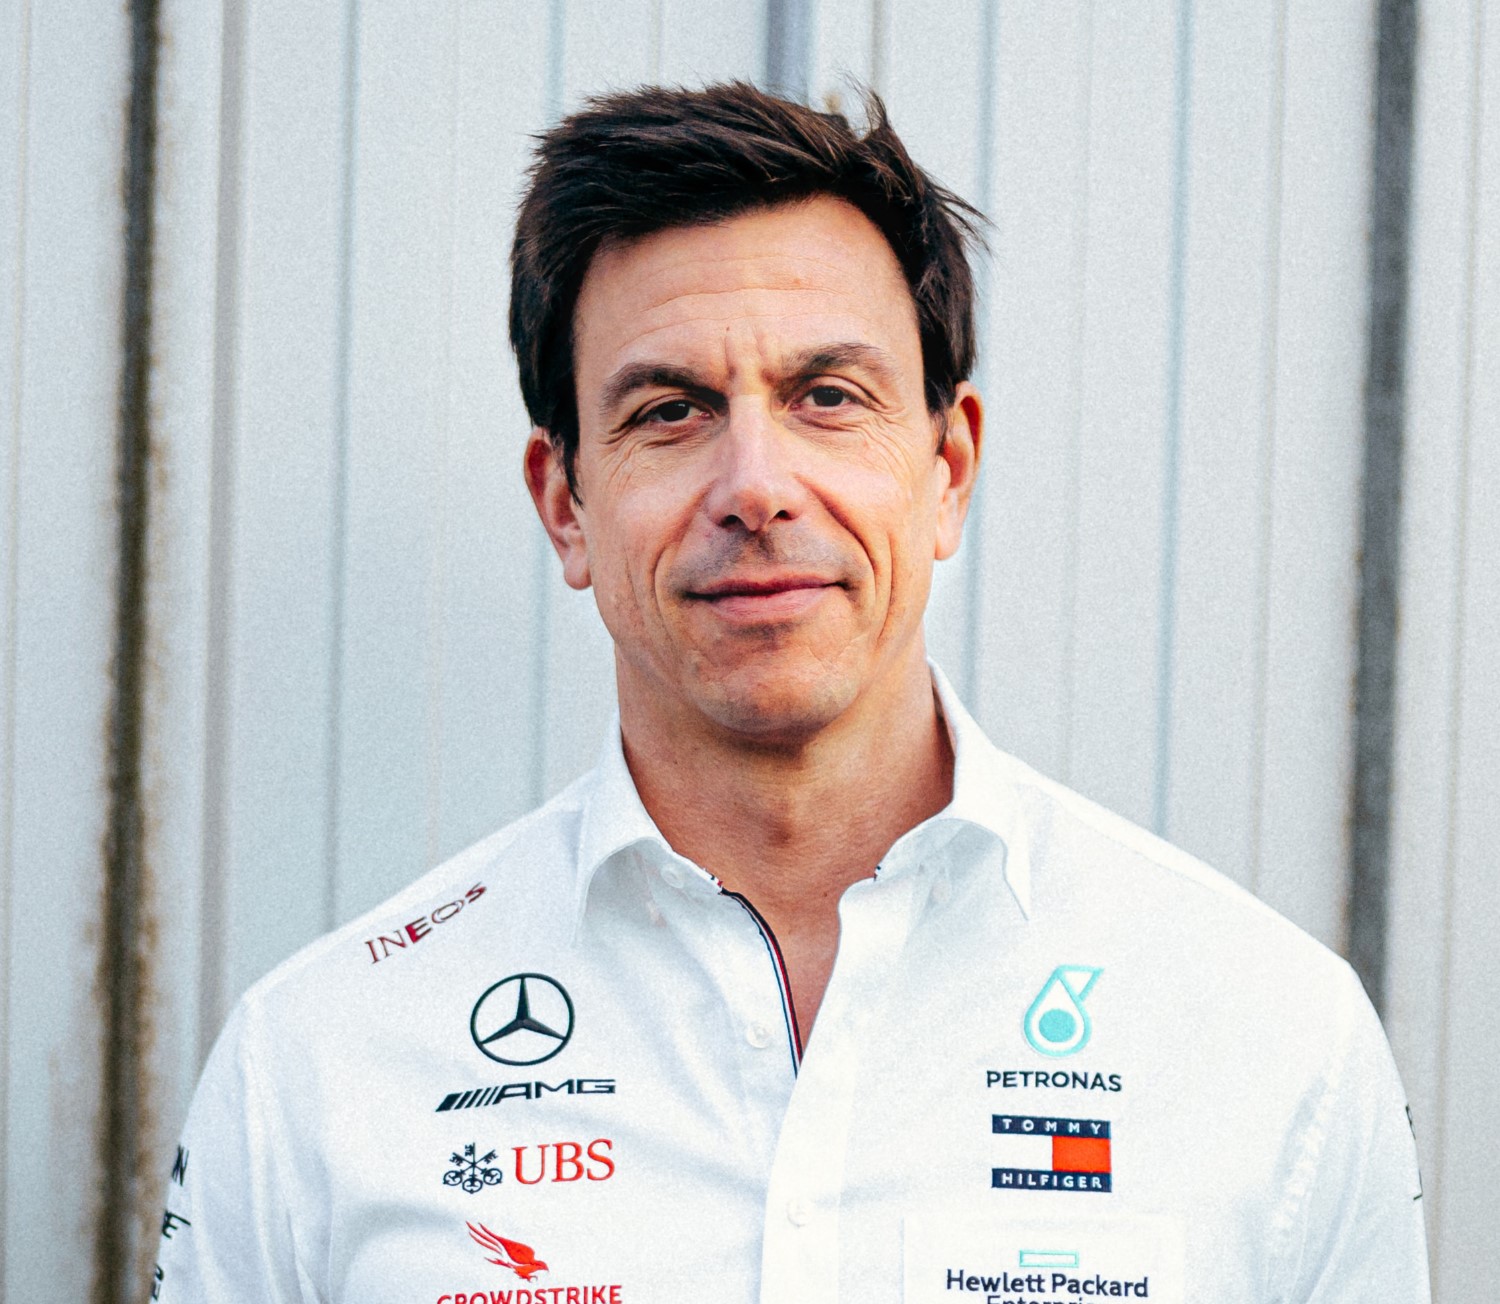 Wolff likely will wait to see how Vettel performs this year before making a decision